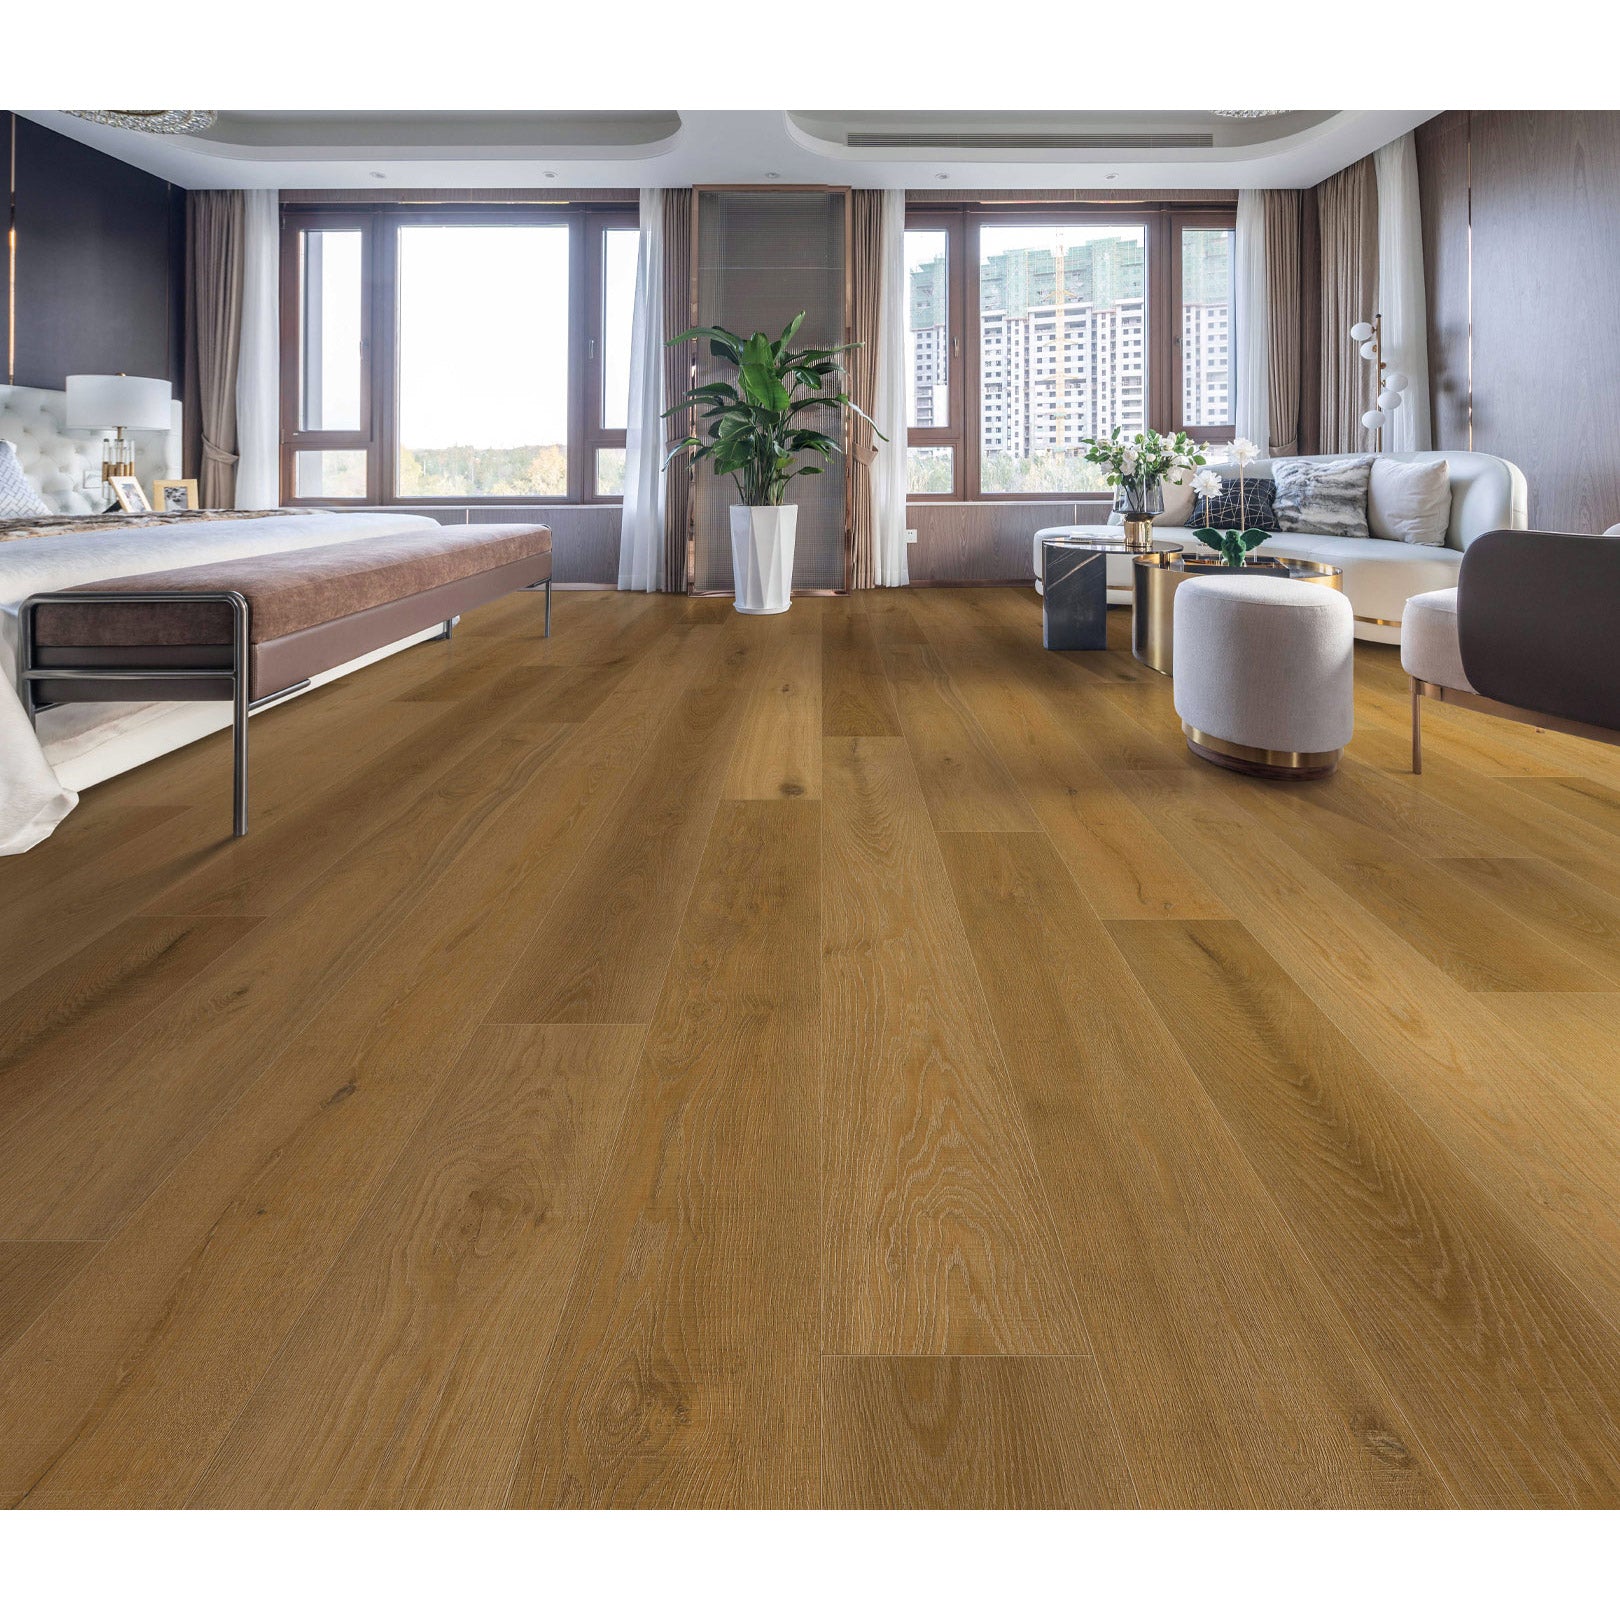 Provenza Floors - New Wave - 8.75 in. x 72 in. Rigid Core - Nest Egg